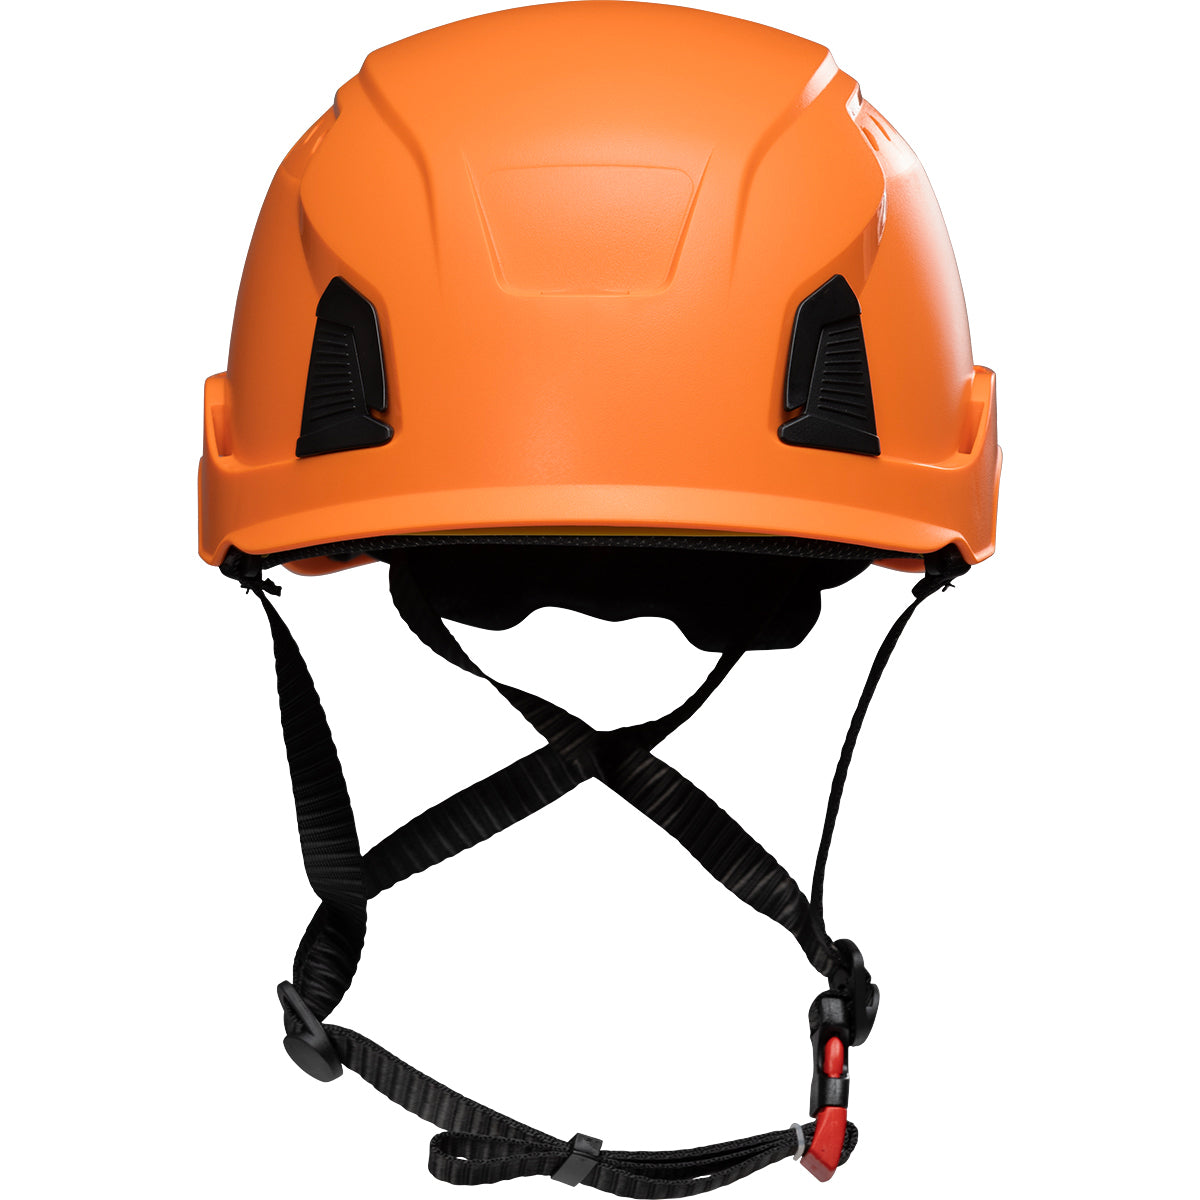 PIP 280-HP1491RVM-03 Vented, Industrial Climbing Helmet with Mips Technology, ABS Shell, EPS Foam Impact Liner, HDPE Suspension, Wheel Ratchet Adjustment and 4-Point Chin Strap